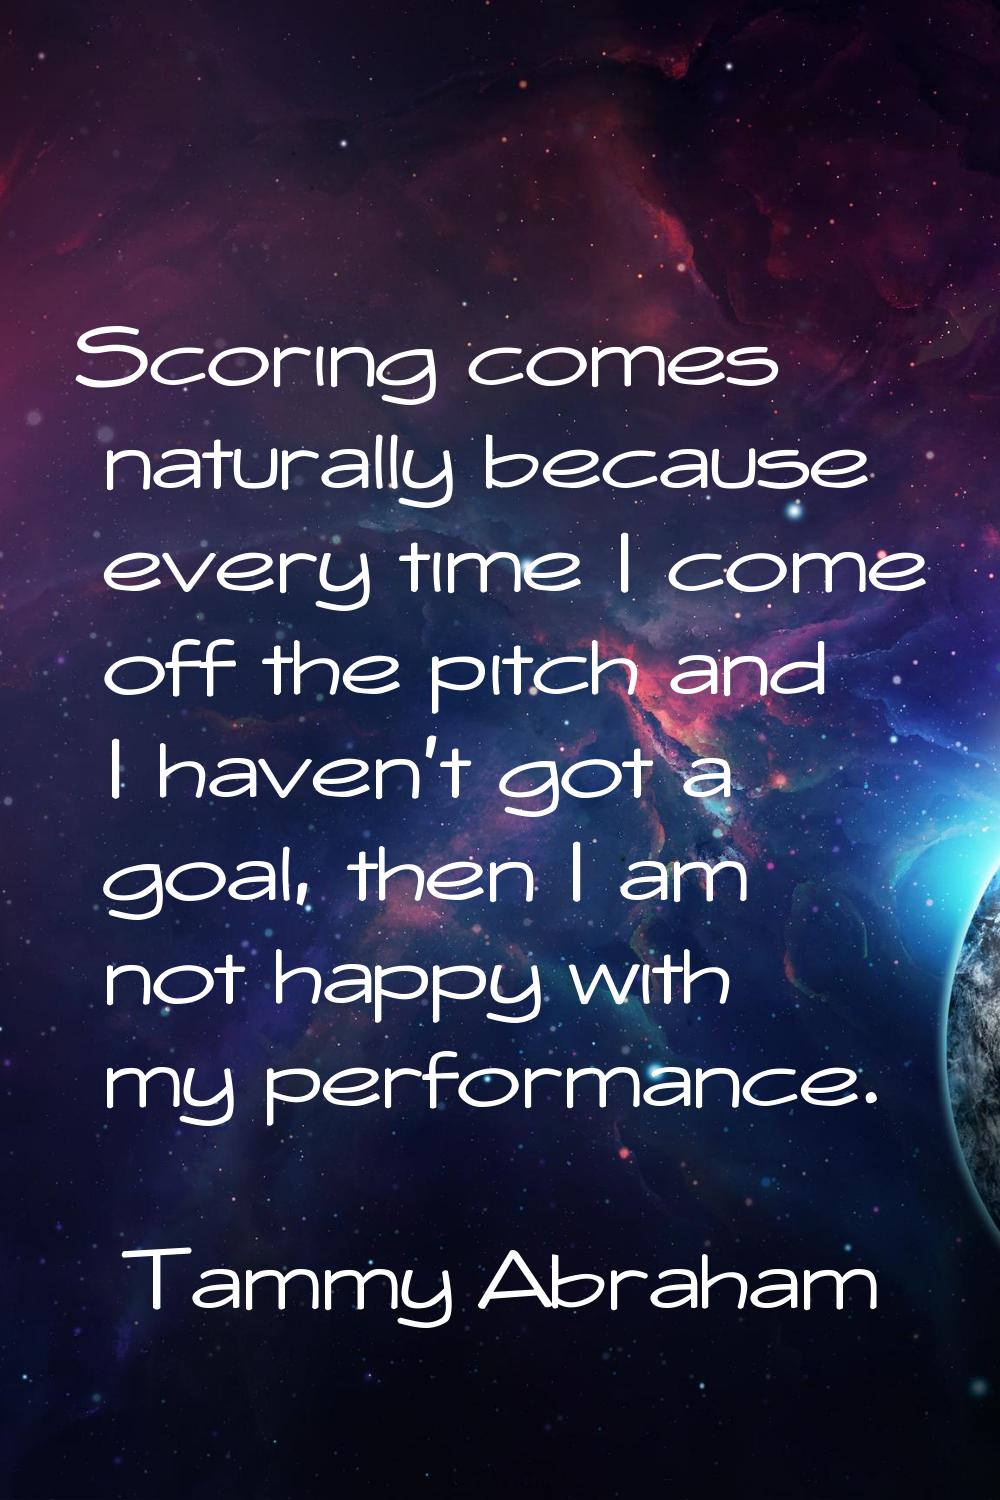 Scoring comes naturally because every time I come off the pitch and I haven't got a goal, then I am